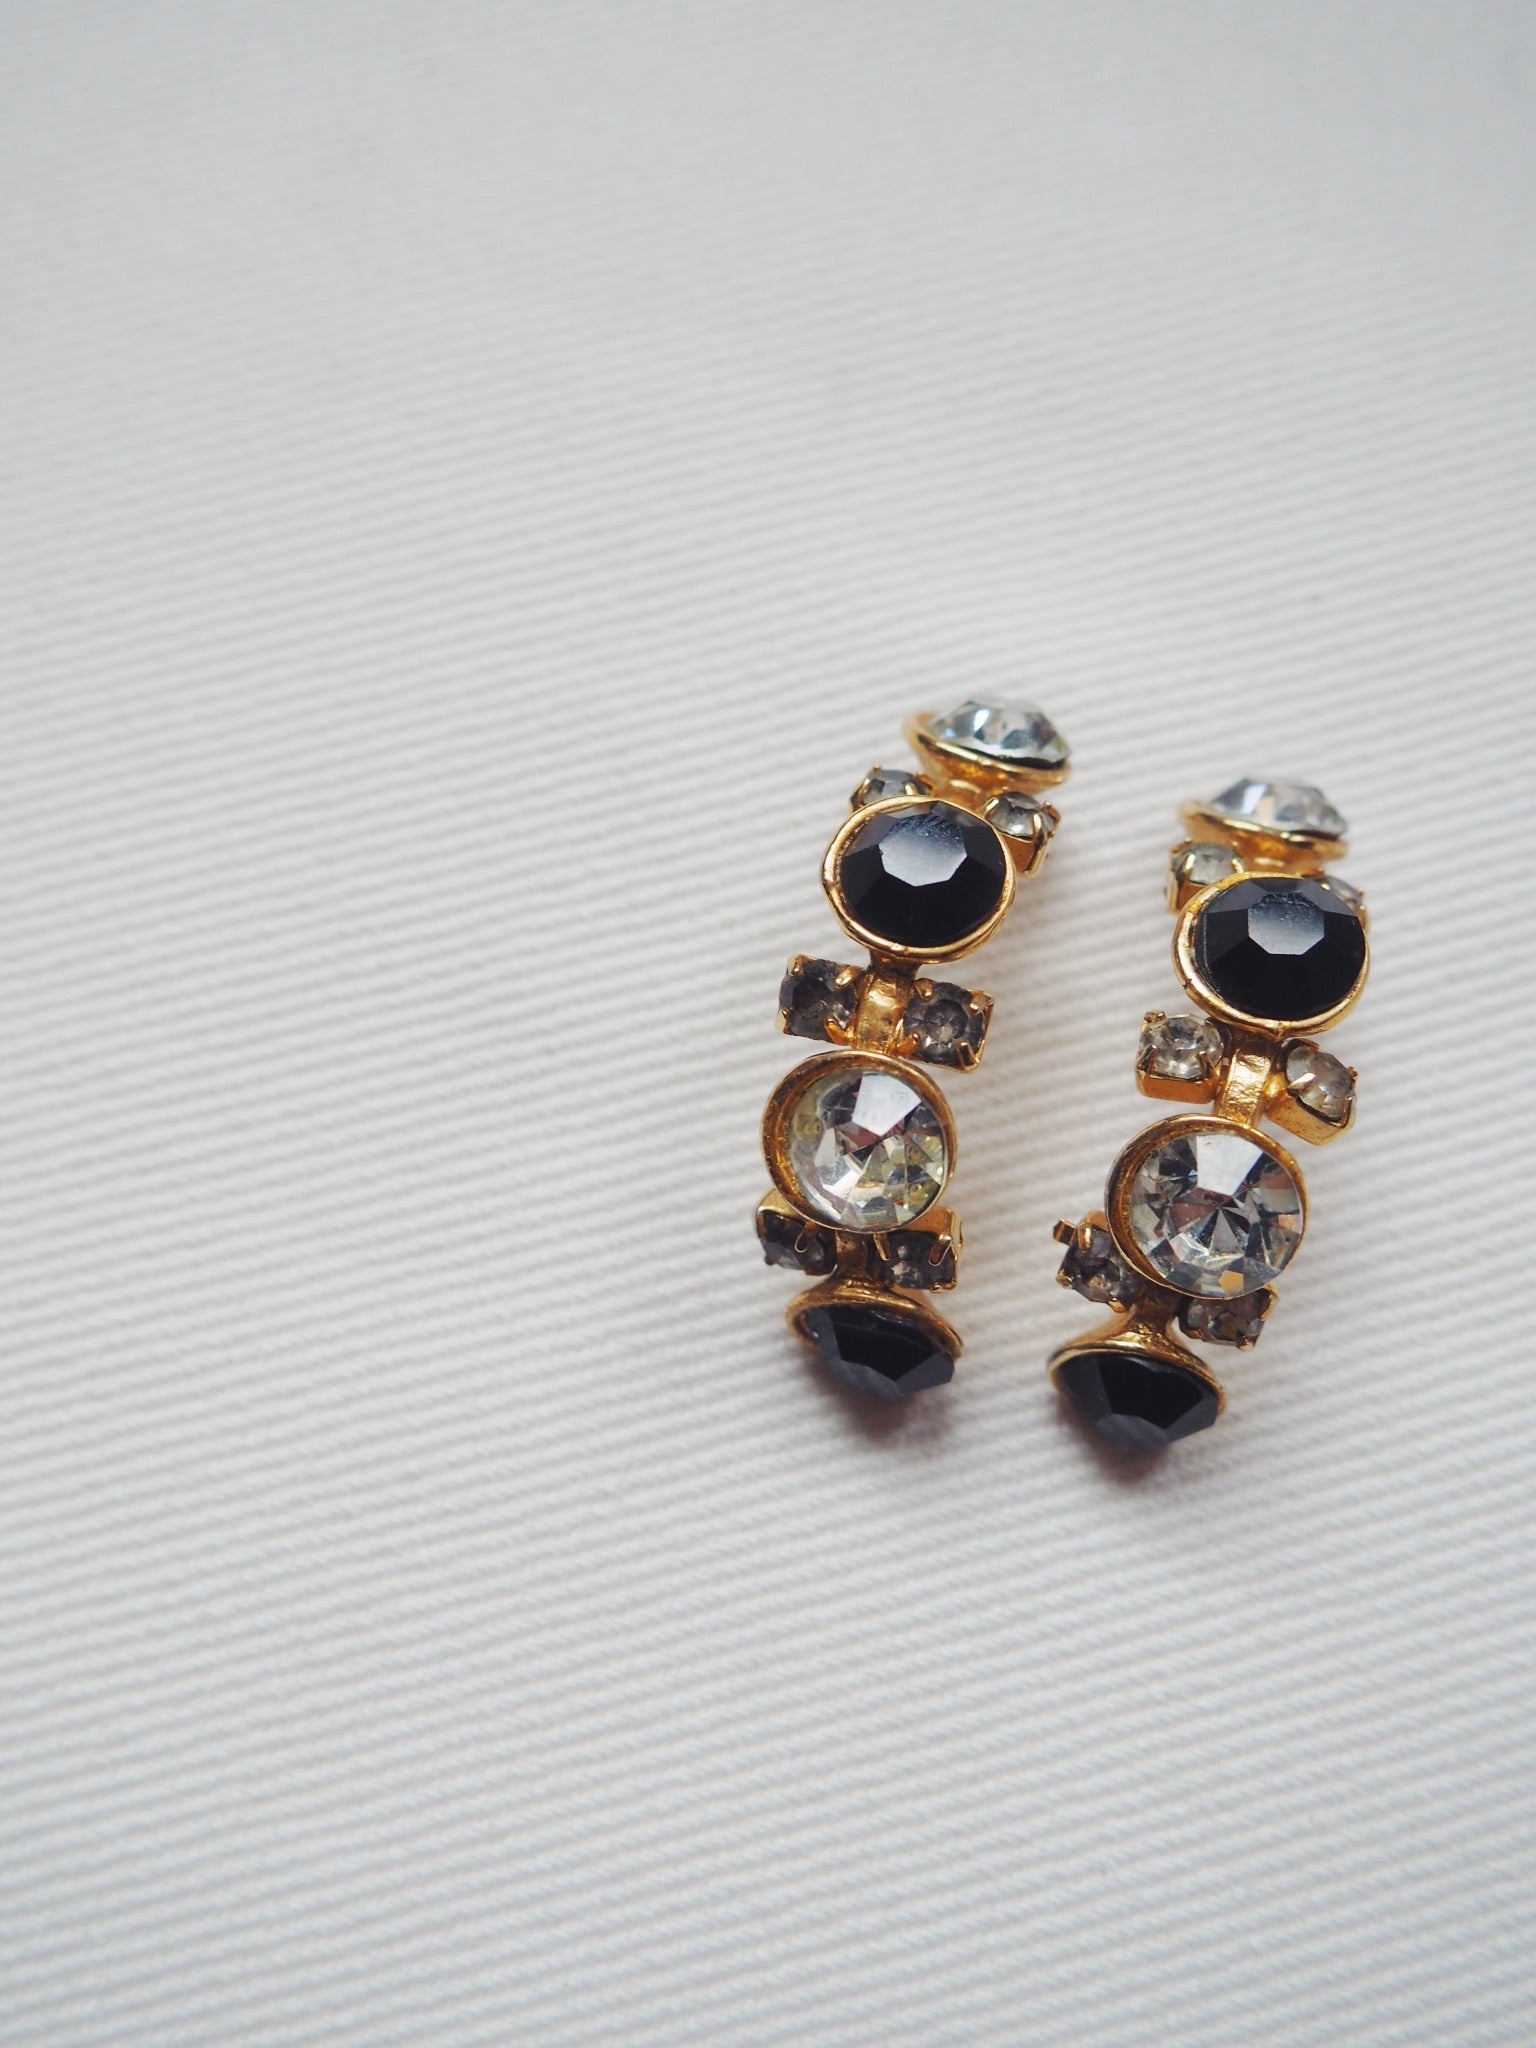 Vintage Two Toned Statement Earrings